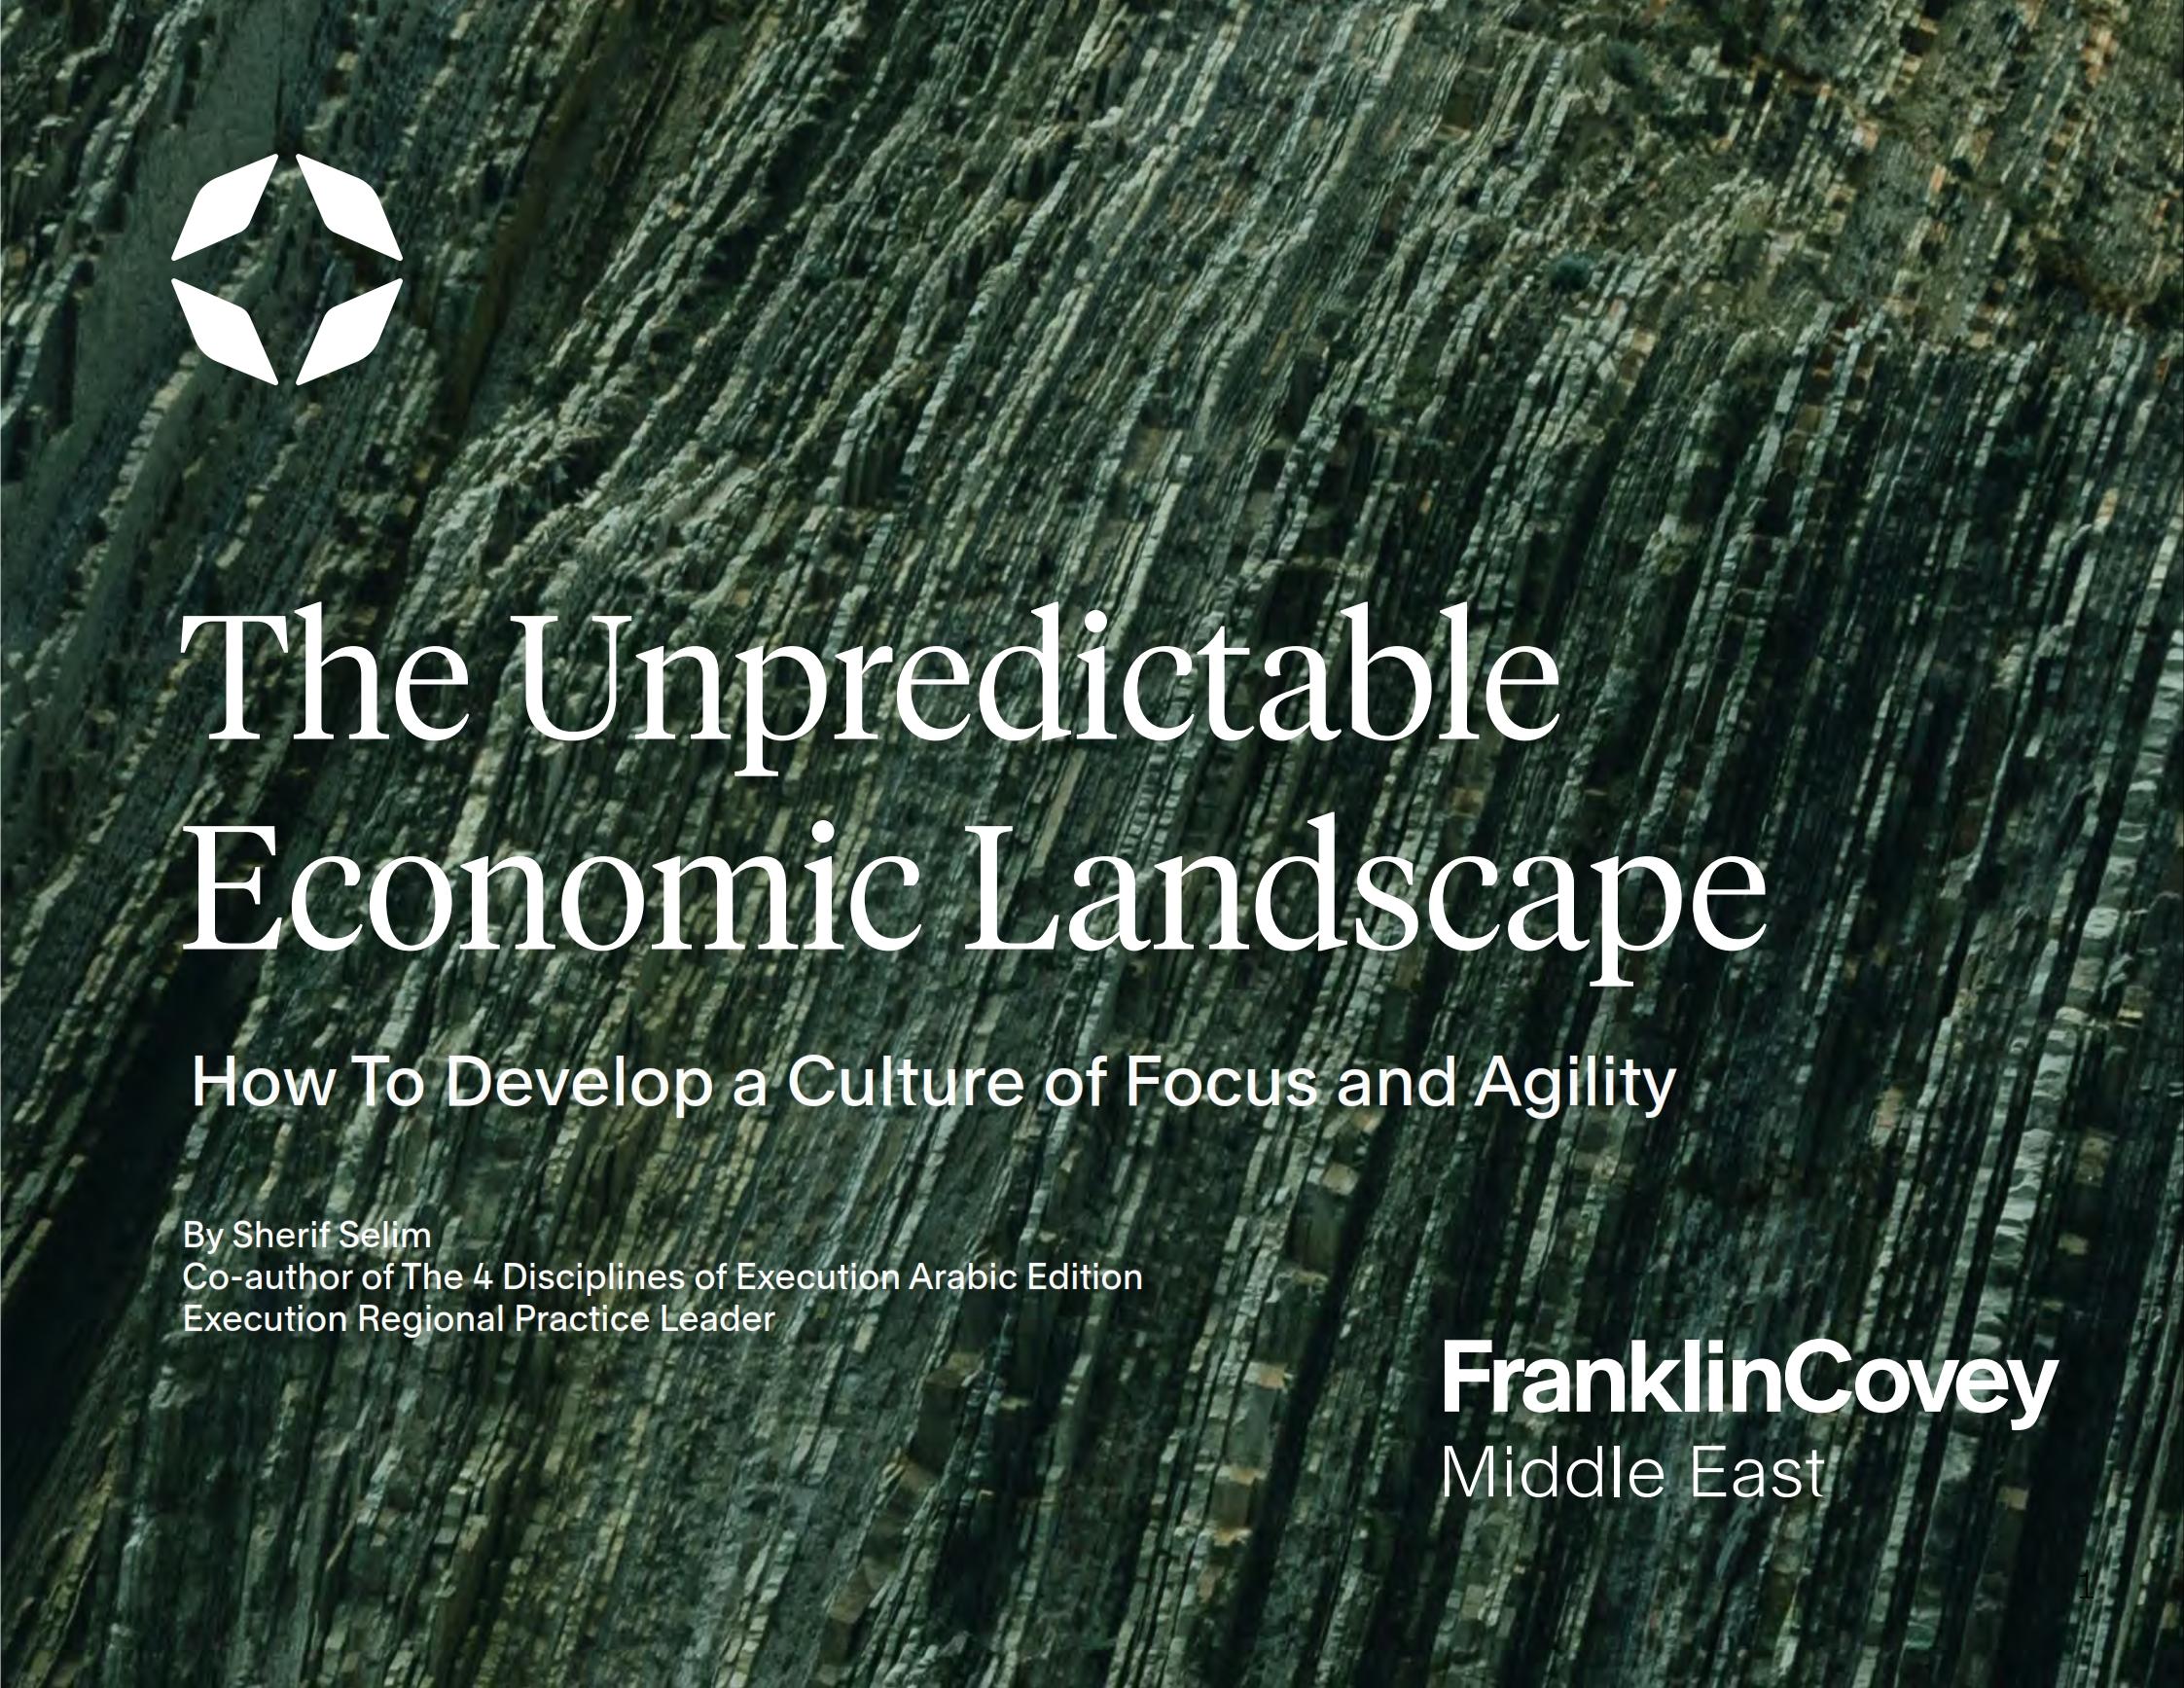 Whitepaper: The Unpredictable Economic Landscape How To Develop a Culture of Focus and Agility